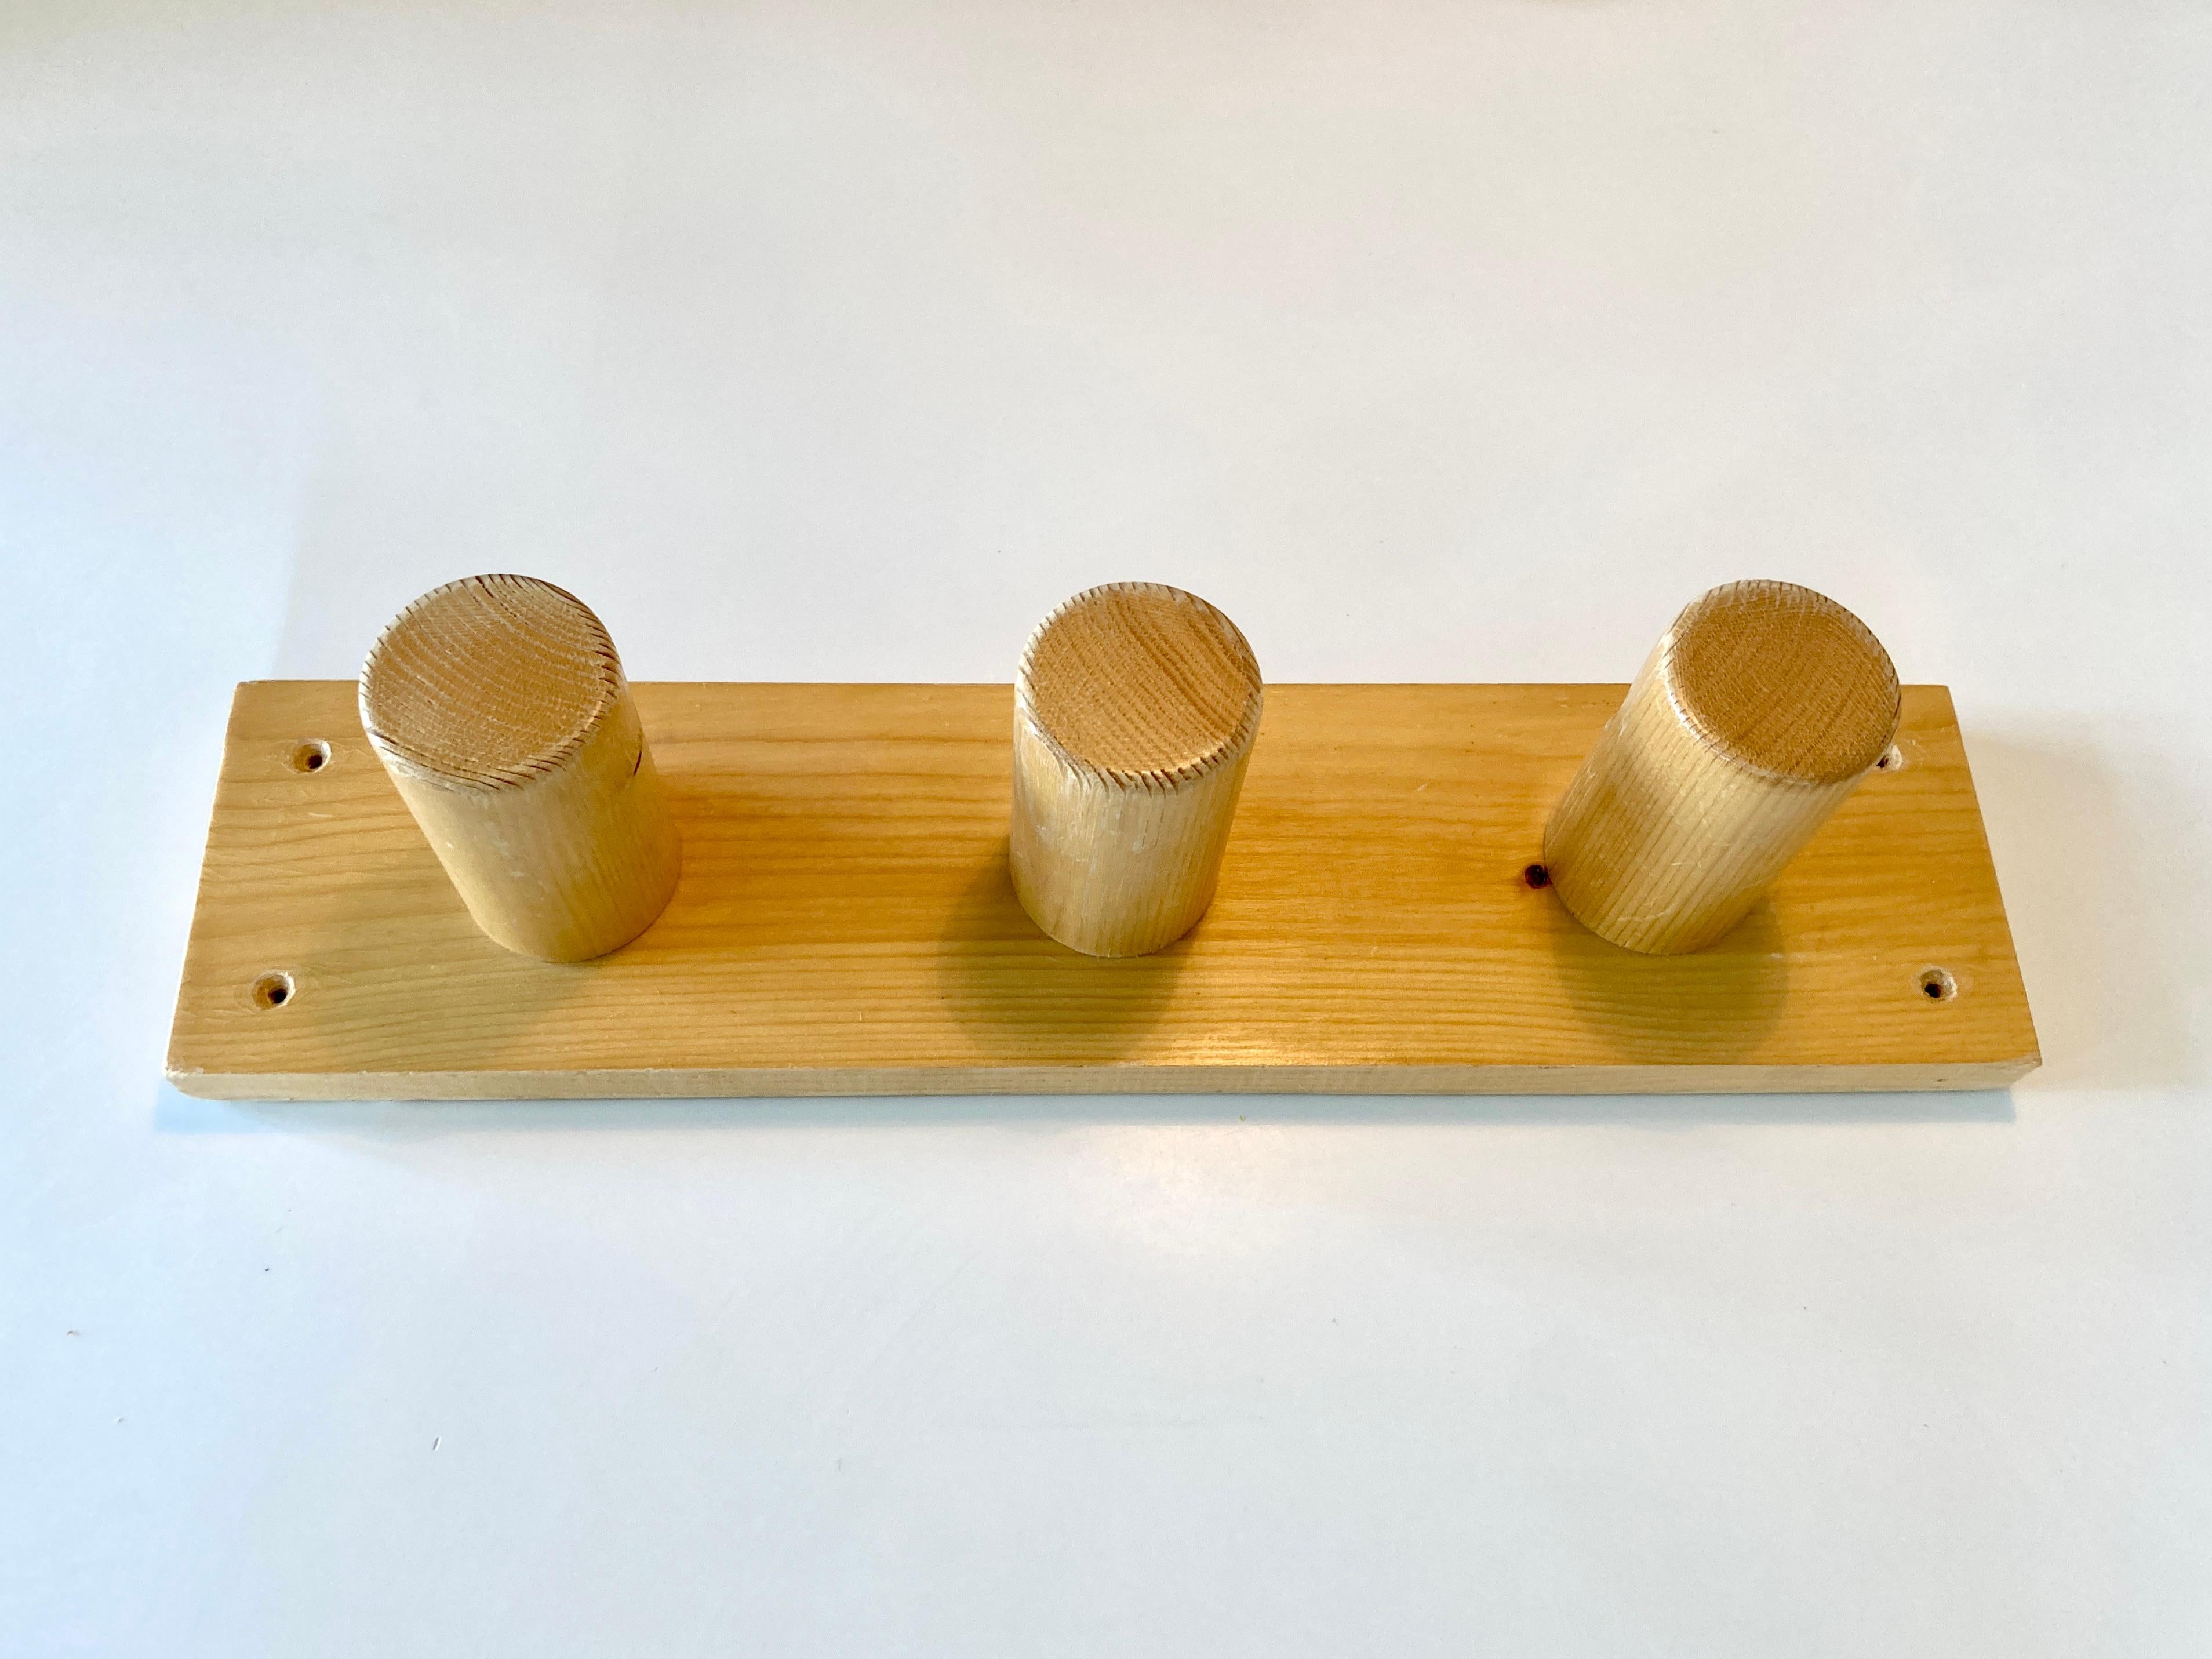 Coat rack sourced from an apartment in Arc 1600, France.

Selected by Charlotte Perriand for Les Arcs, France, likely from the 1970s/early 80s.

Made of solid pine with 3 chunky pegs.

No damage, pegs are good and solid with no wobbles. Wood has a